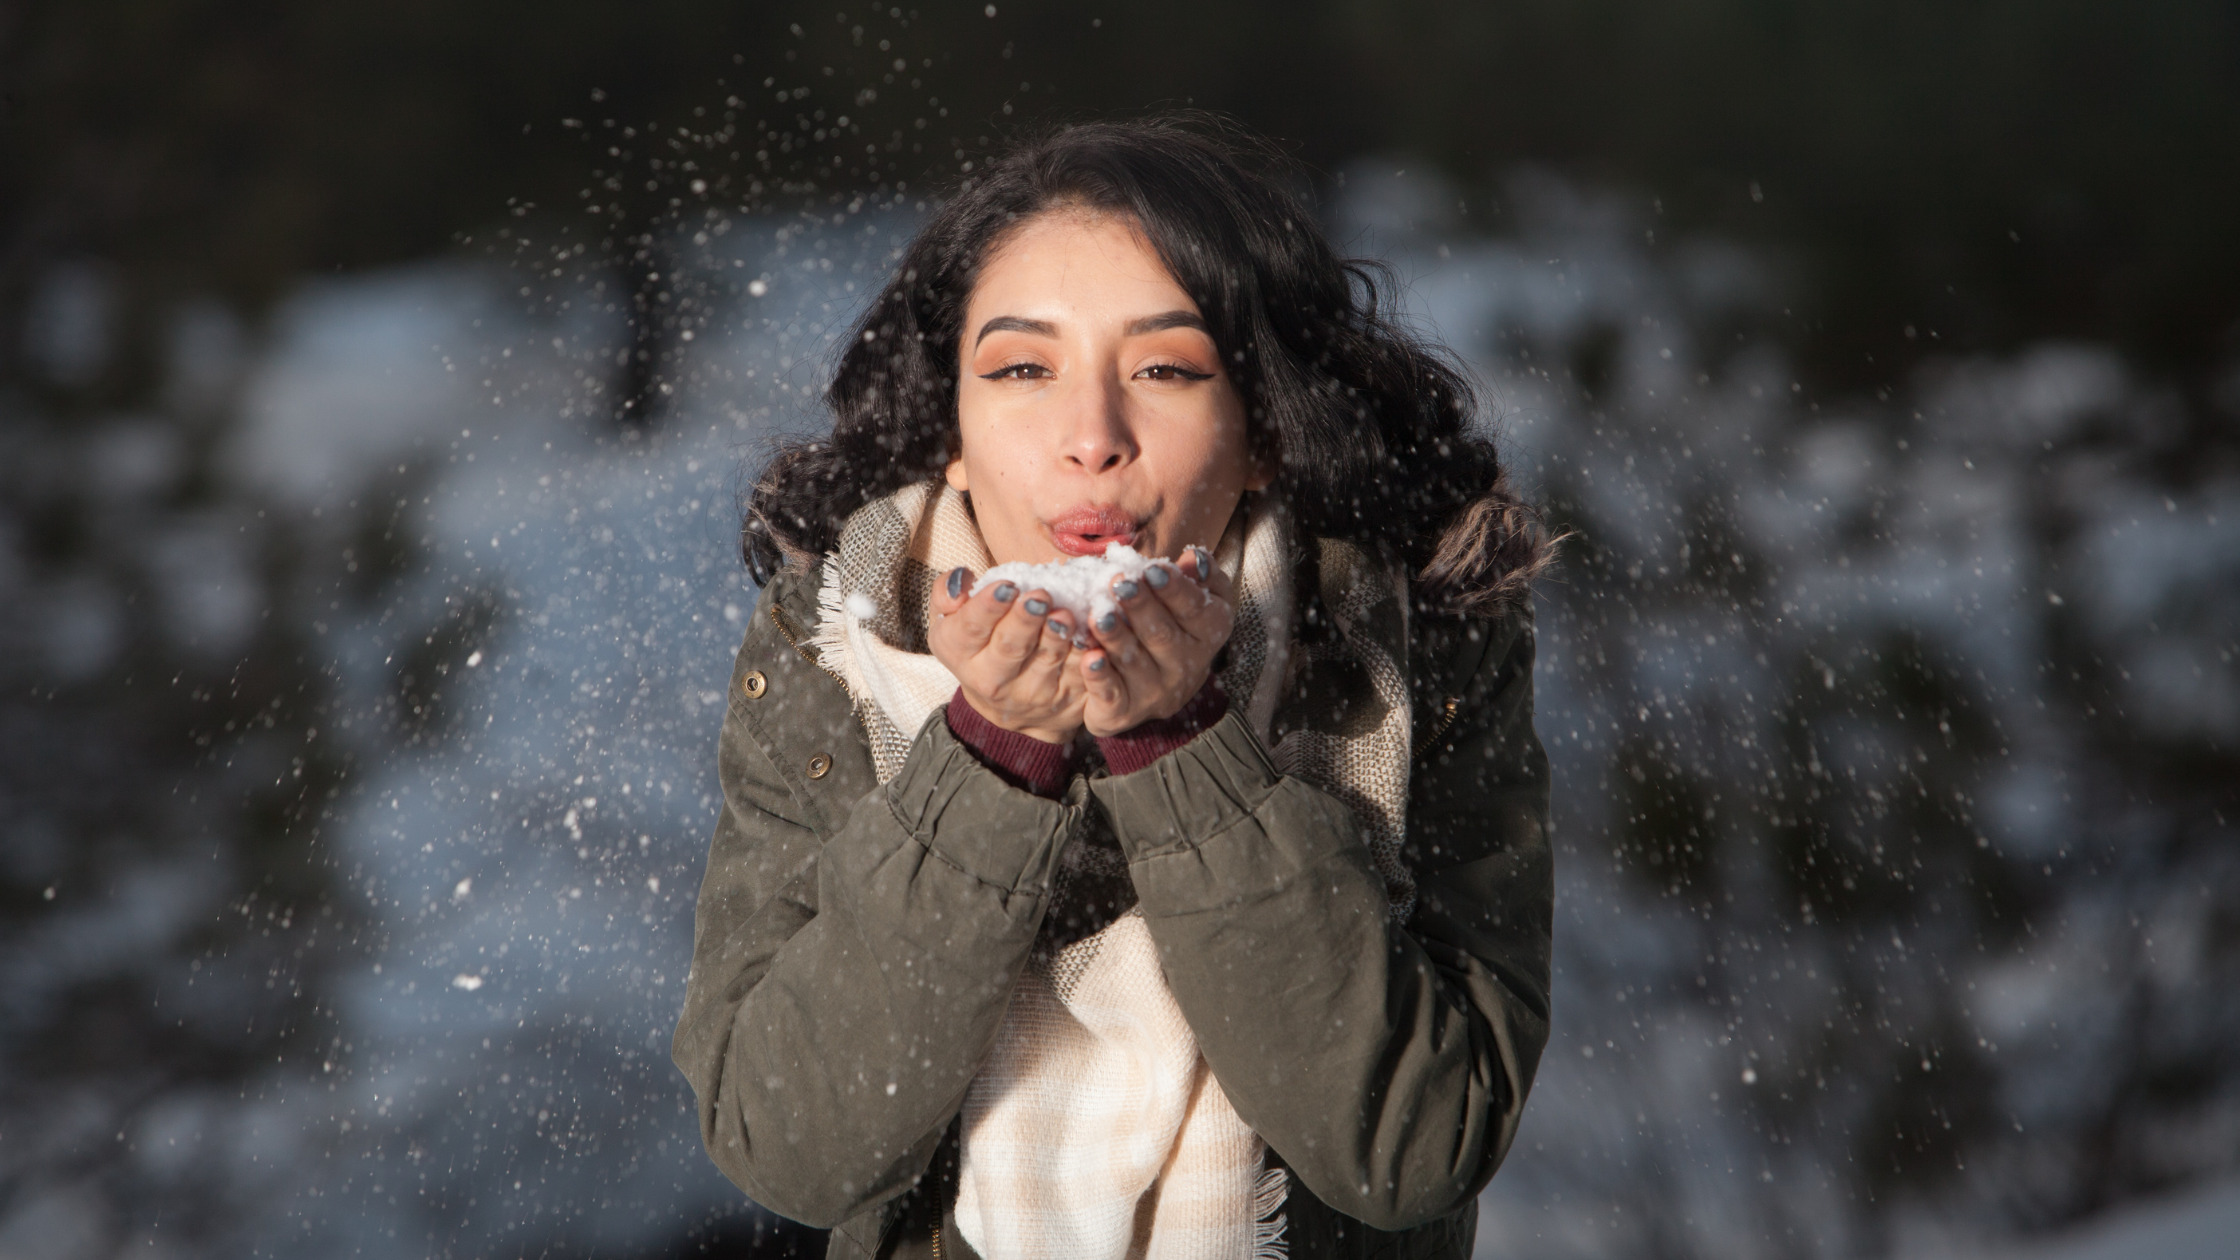 What Is The Winter Blues And How To Find A Cure For The Winter Blues. Start Counseling Today In Greensboro North Carolina To Address The Winter Blues, Also Known As Seasonal Affective Disorder.